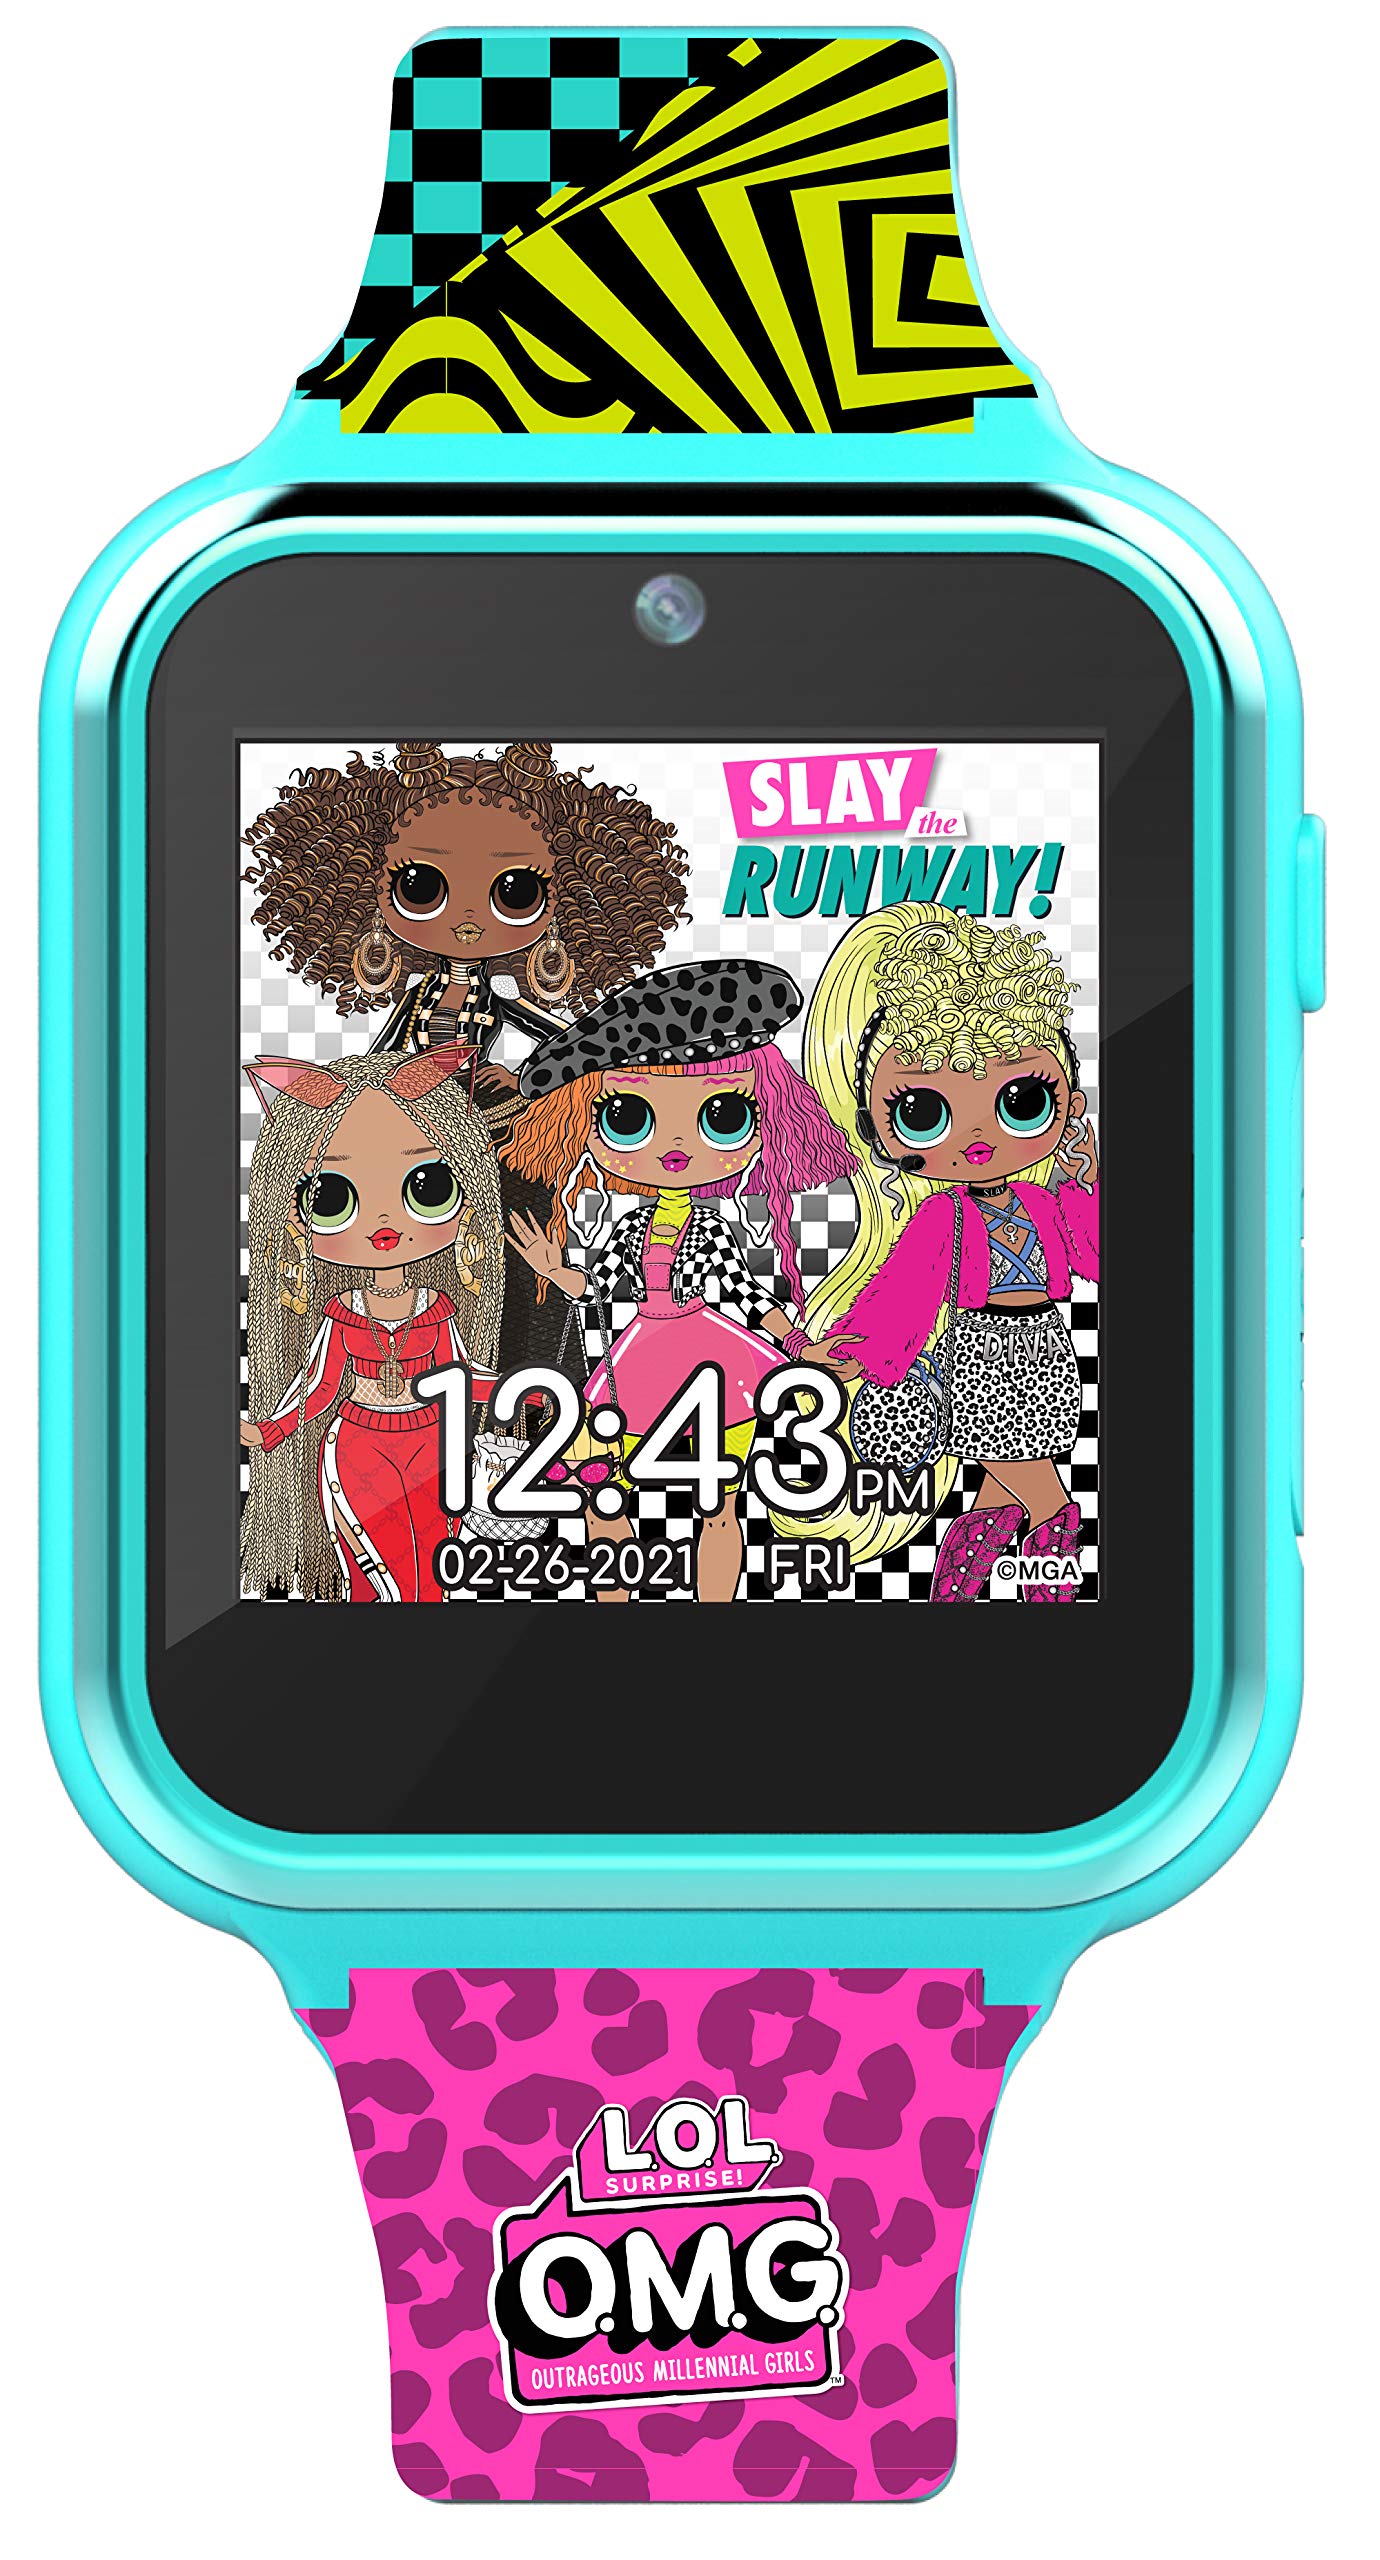 Accutime Kids LOL Surprise Turquoise Educational Learning Touchscreen Smart Watch Toy for Girls, Boys, Toddlers - Selfie Cam, Learning Games, Alarm, Calculator, Pedometer & More (Model: LOL4320OMGAZ)